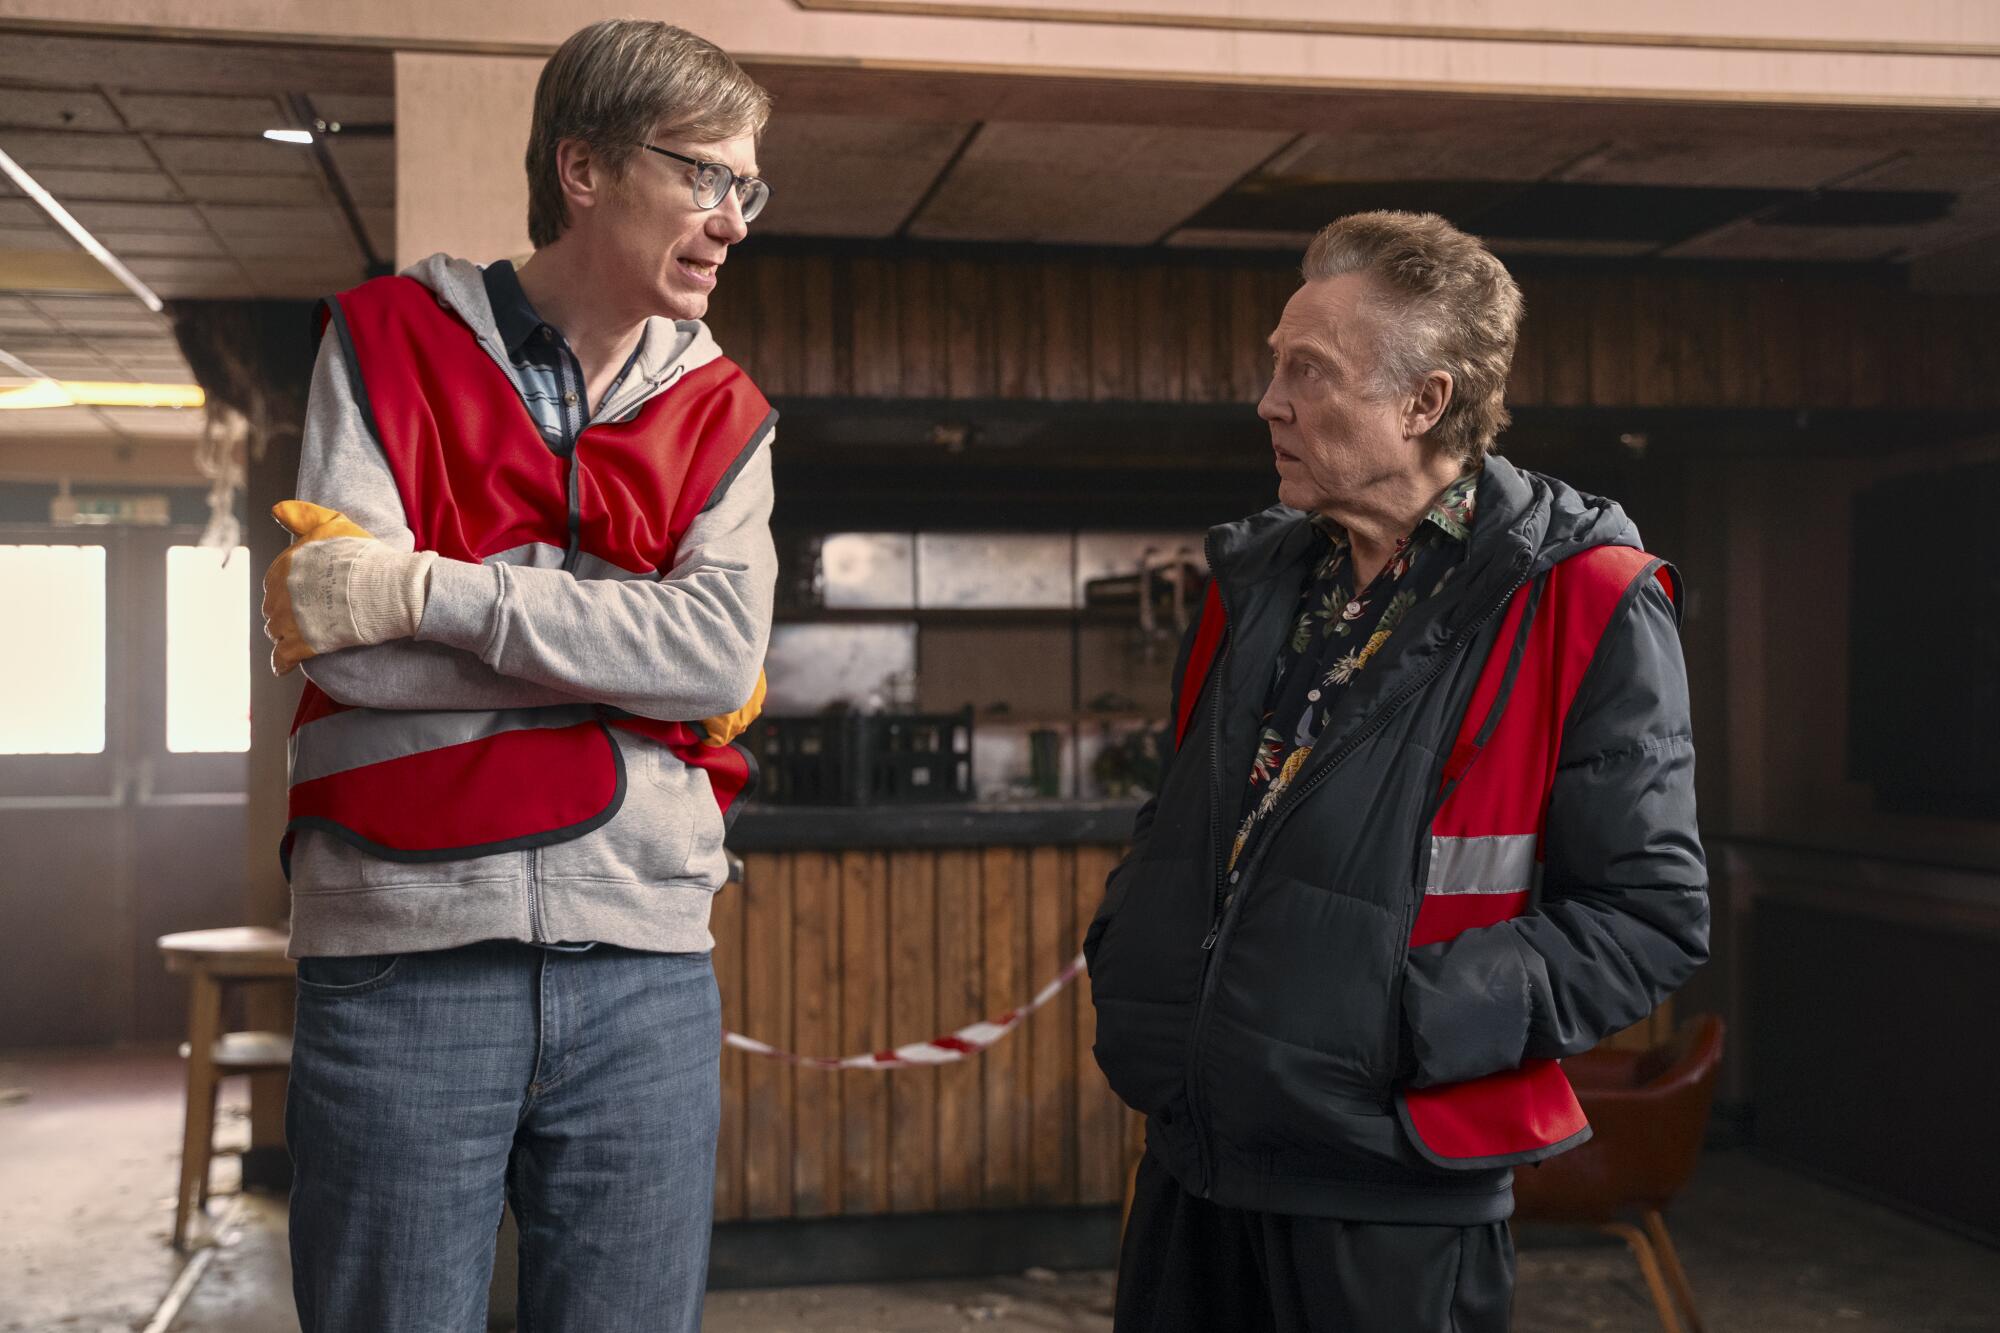 Two men in red reflective vests talk seriously in "The Outlaws."